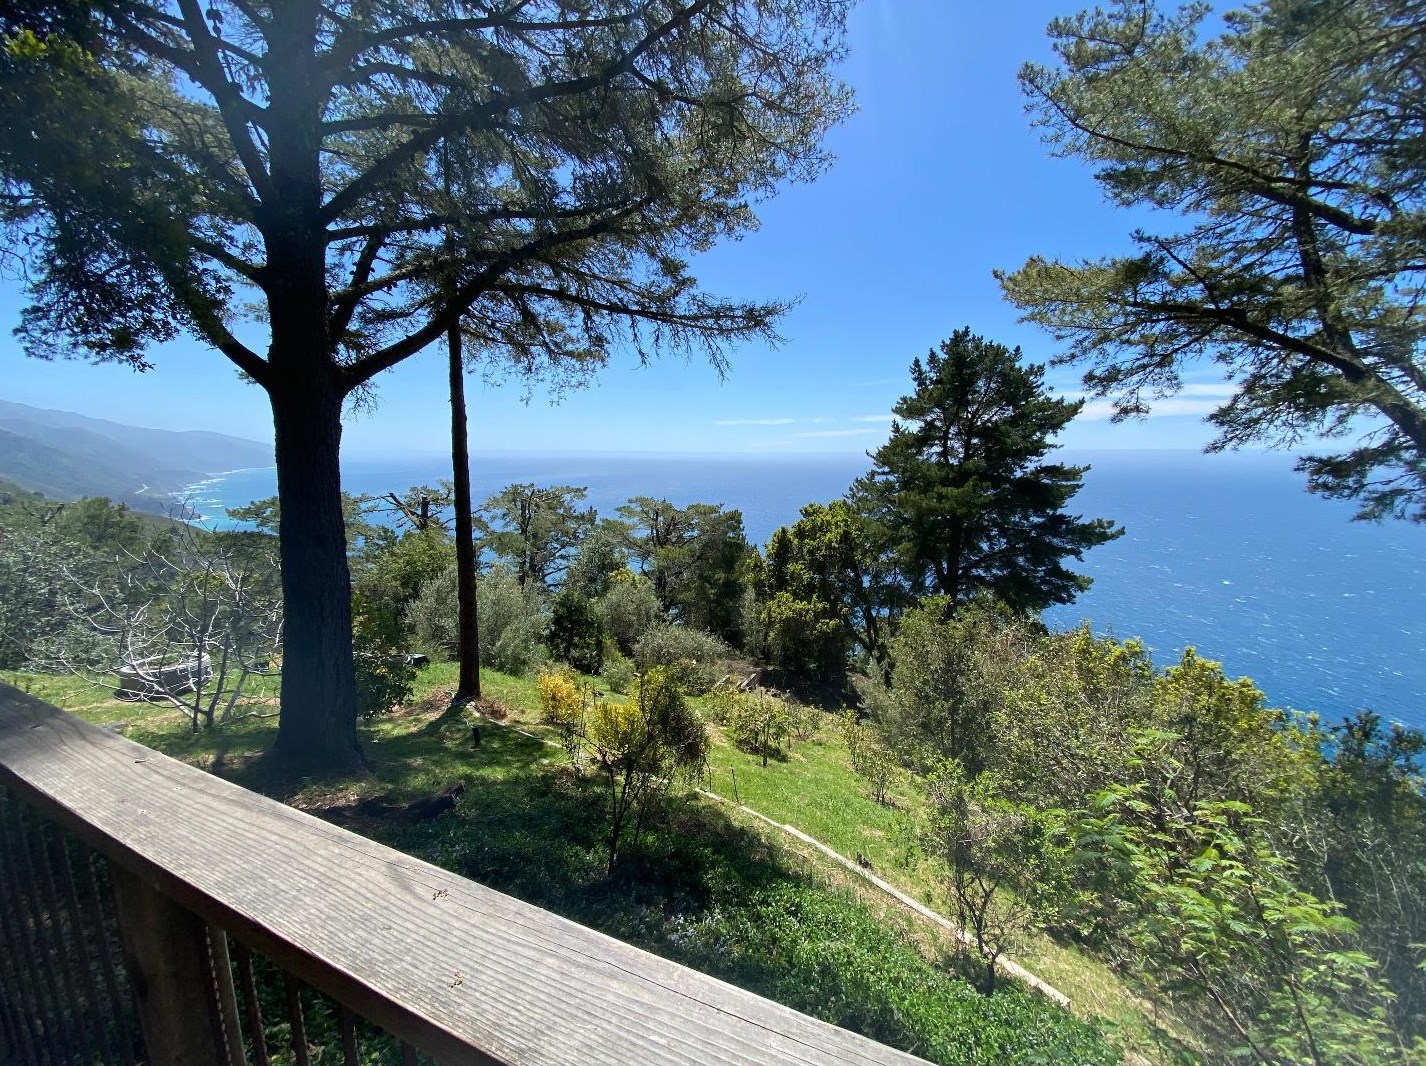 Panoramic View of Blue Ocean and Green Pine Trees across the bottom